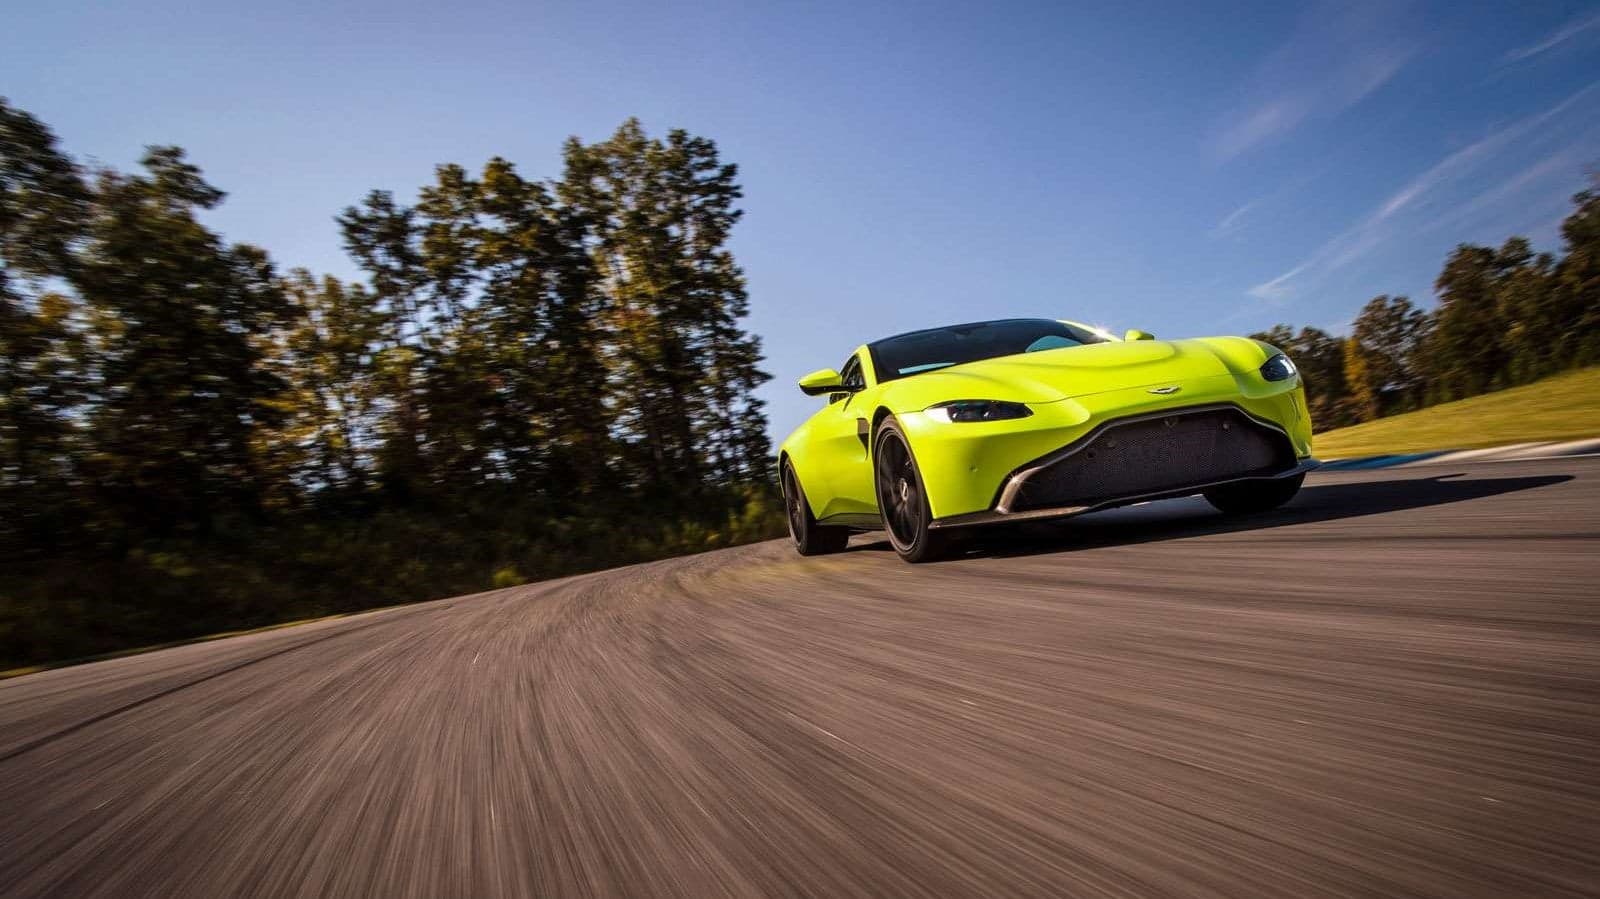 The 2019 Aston Martin Vantage is Almost Sold Out Already